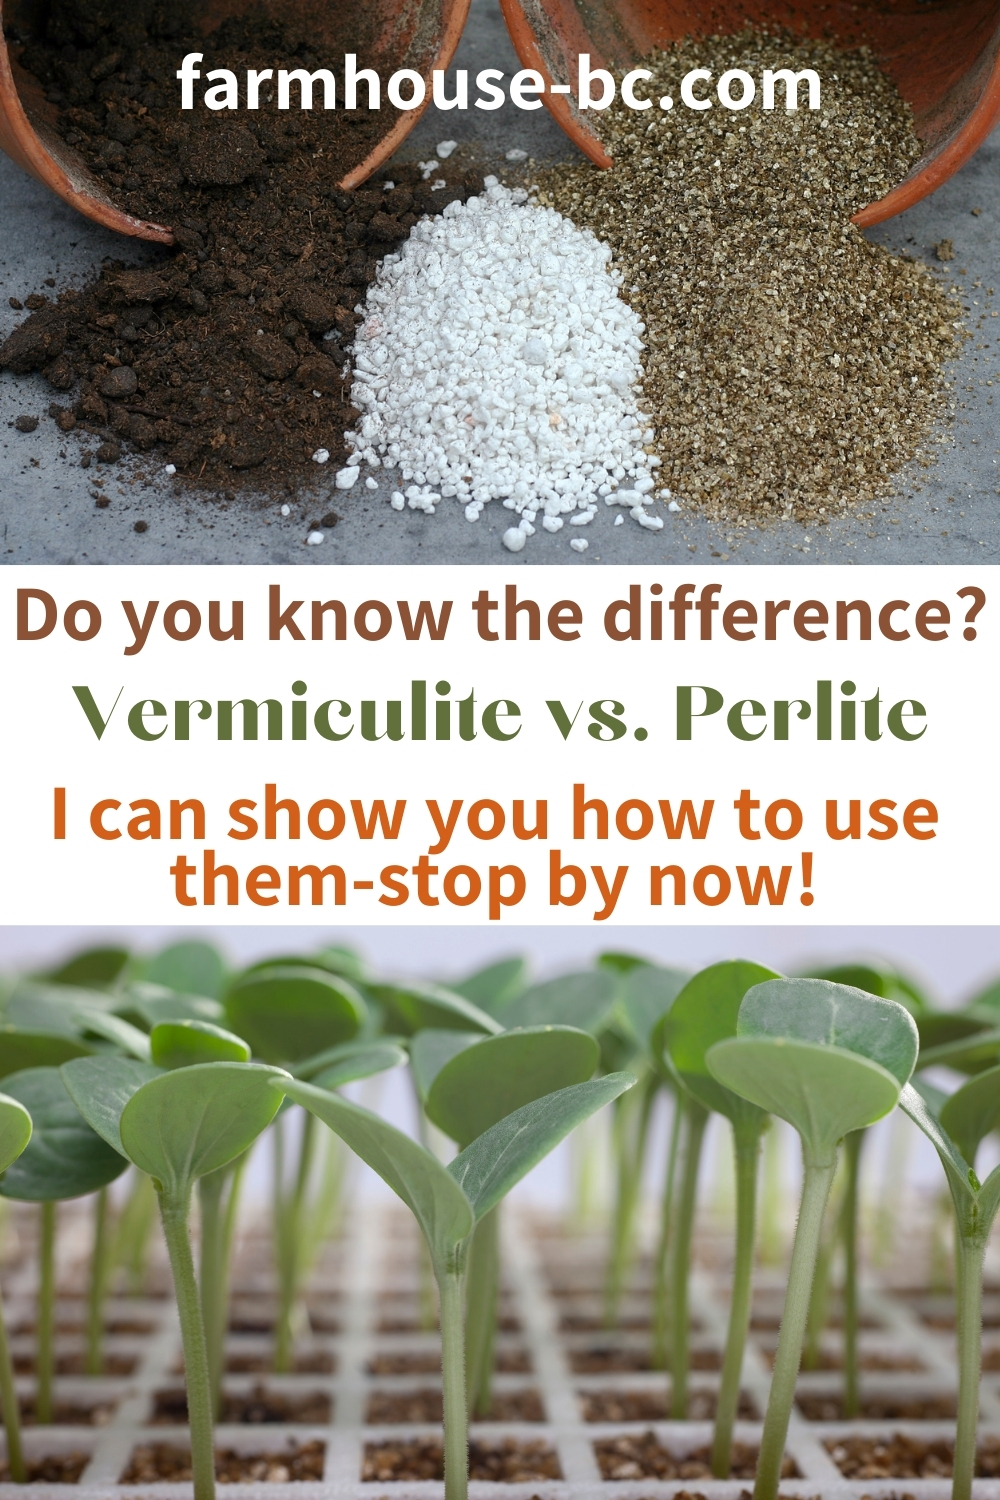 Do you know the difference between perlite vs. vermiculite?